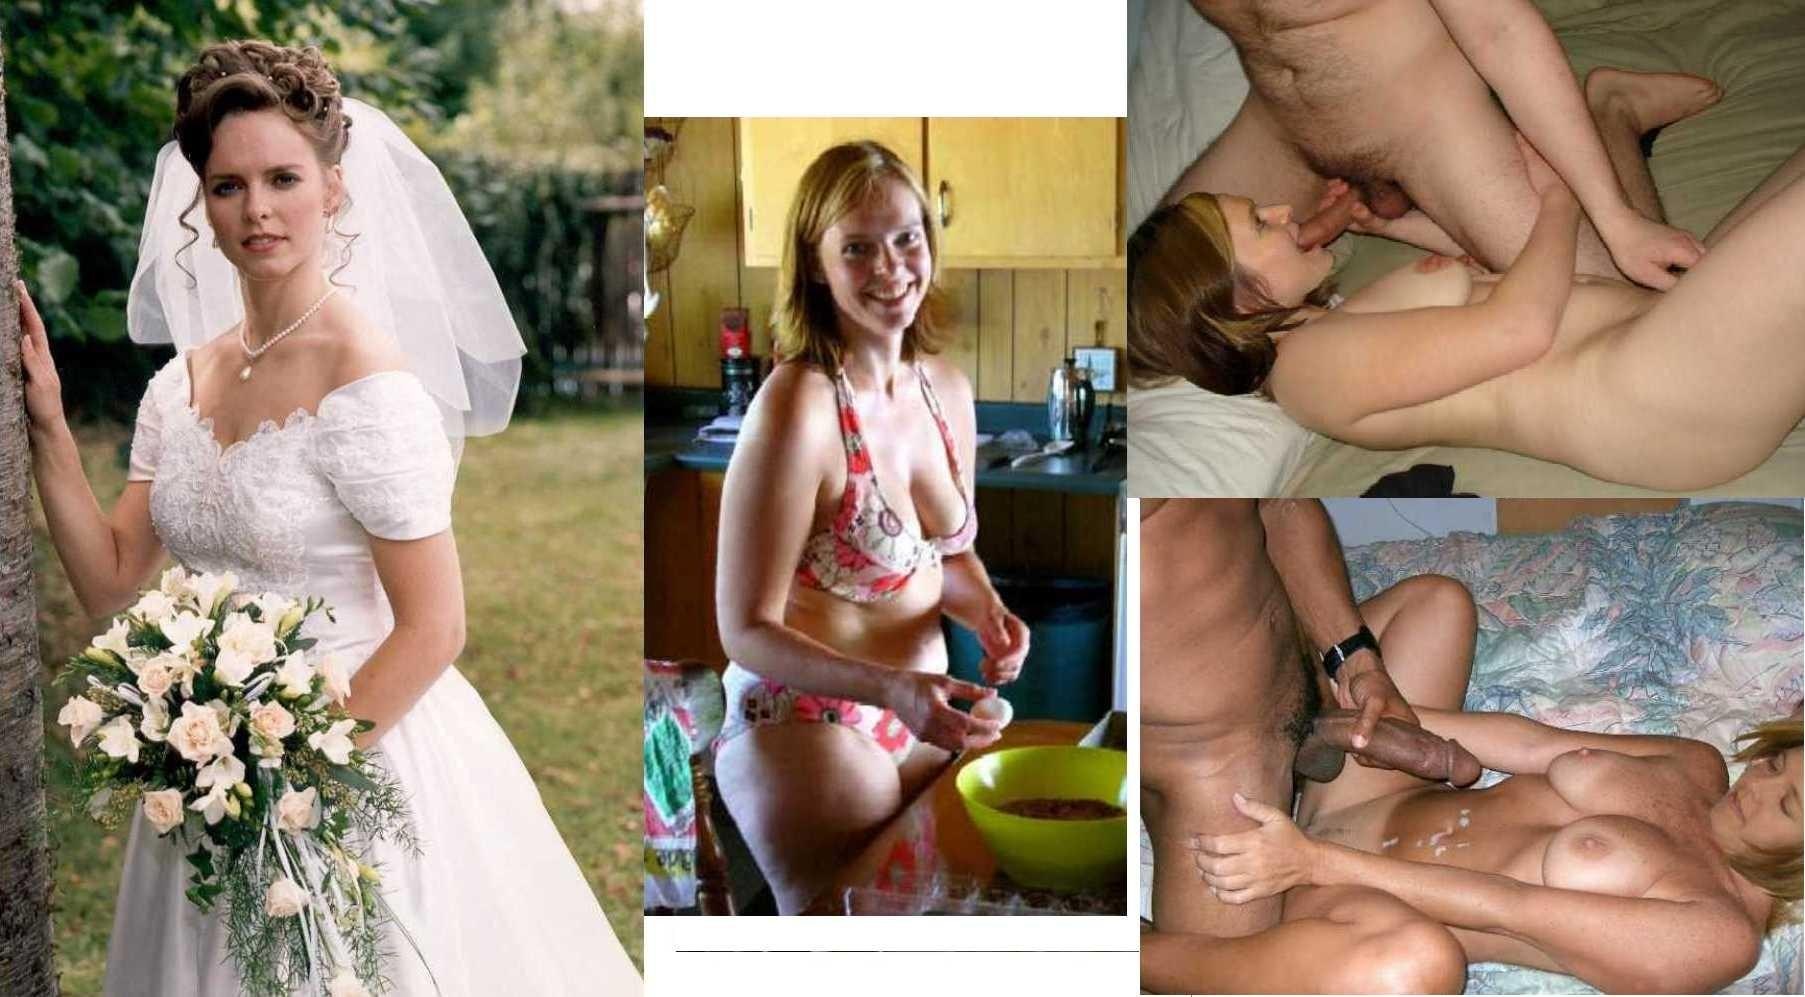 naked pictures of married women Porn Photos